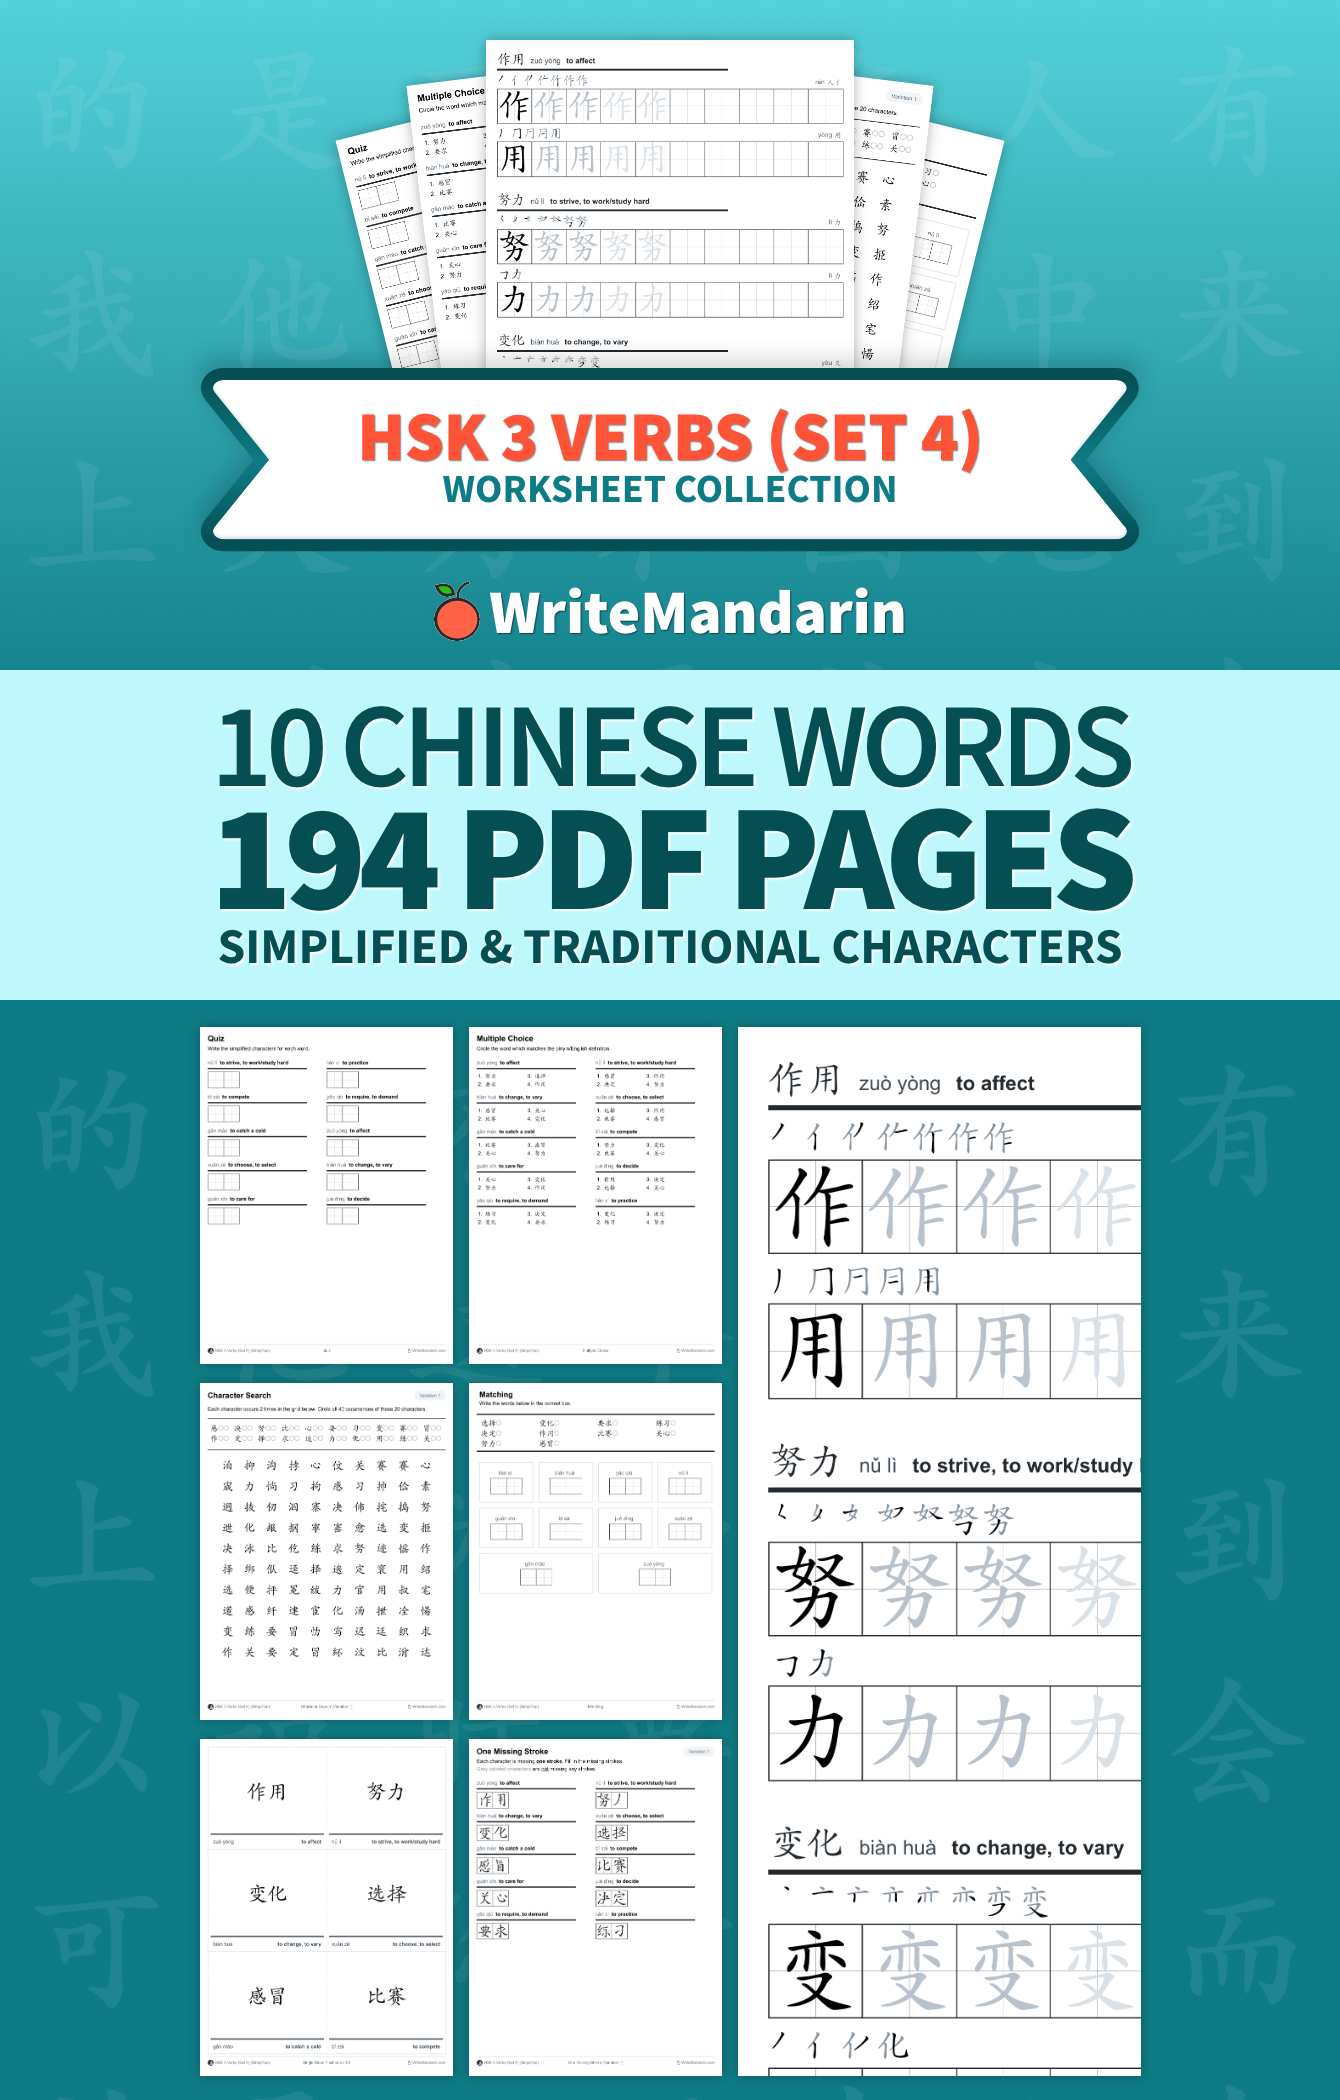 Preview image of HSK 3 Verbs (Set 4) worksheet collection